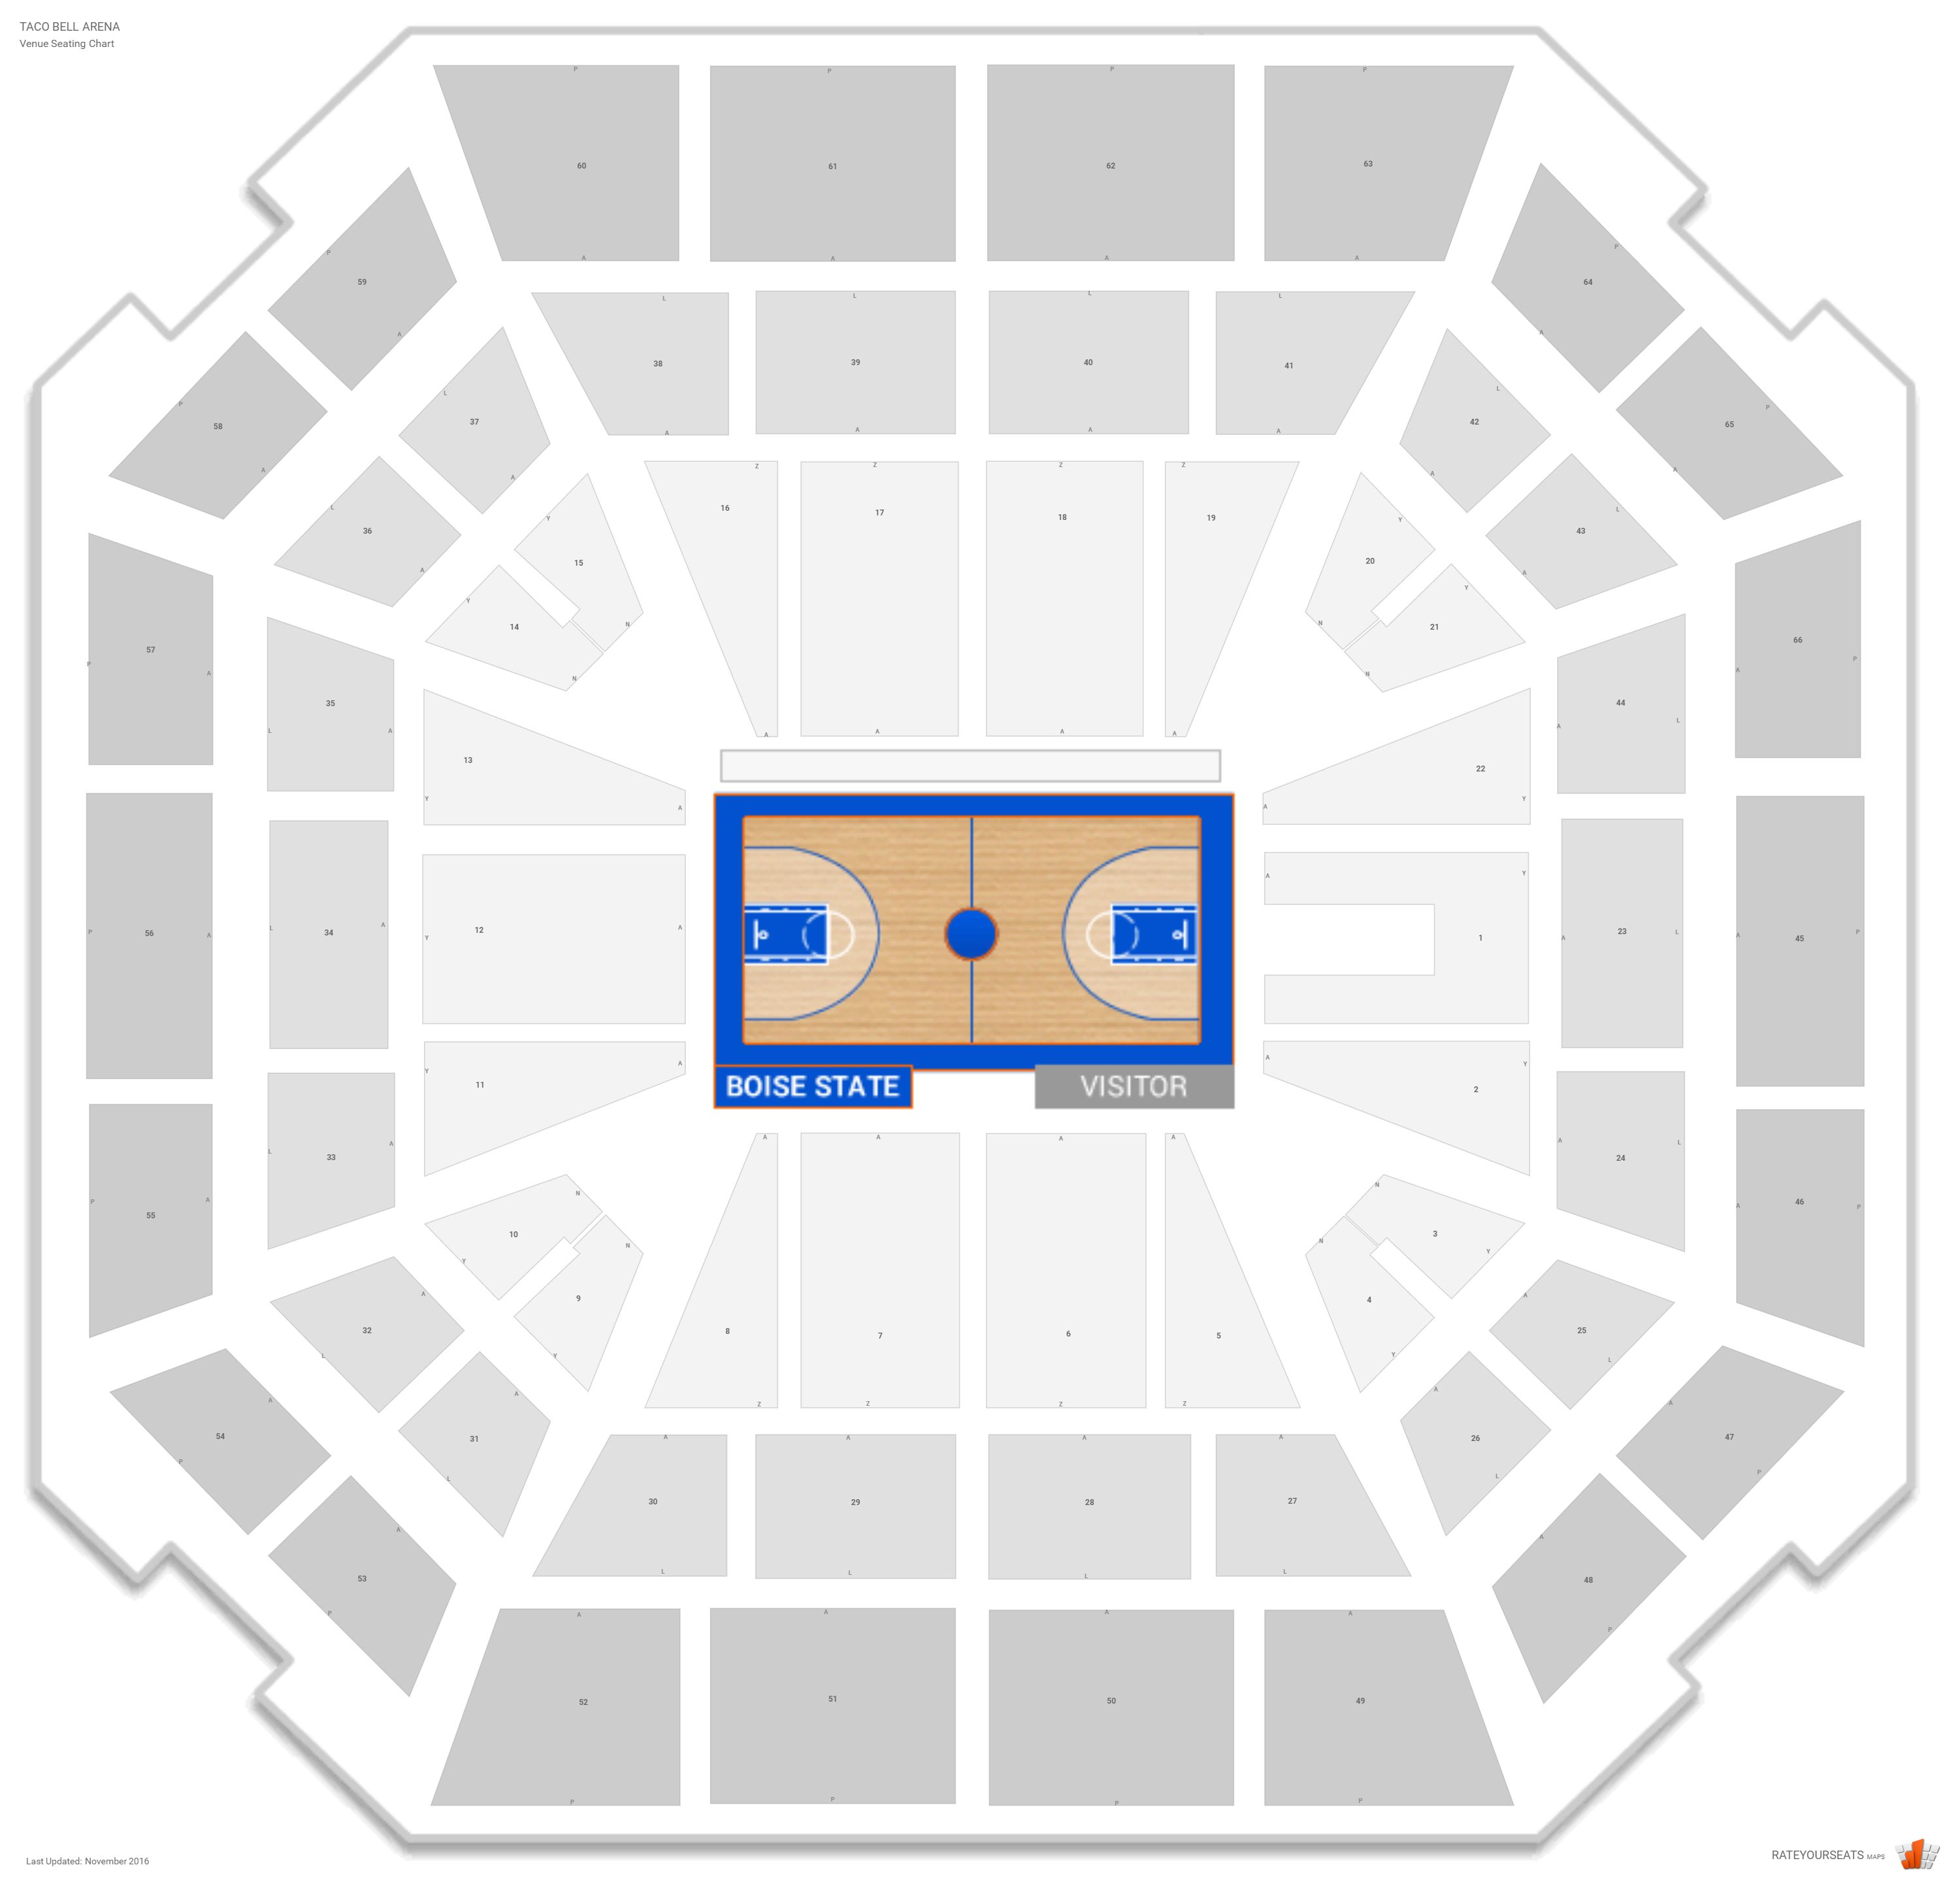 Taco Bell Arena Boise Seating Chart